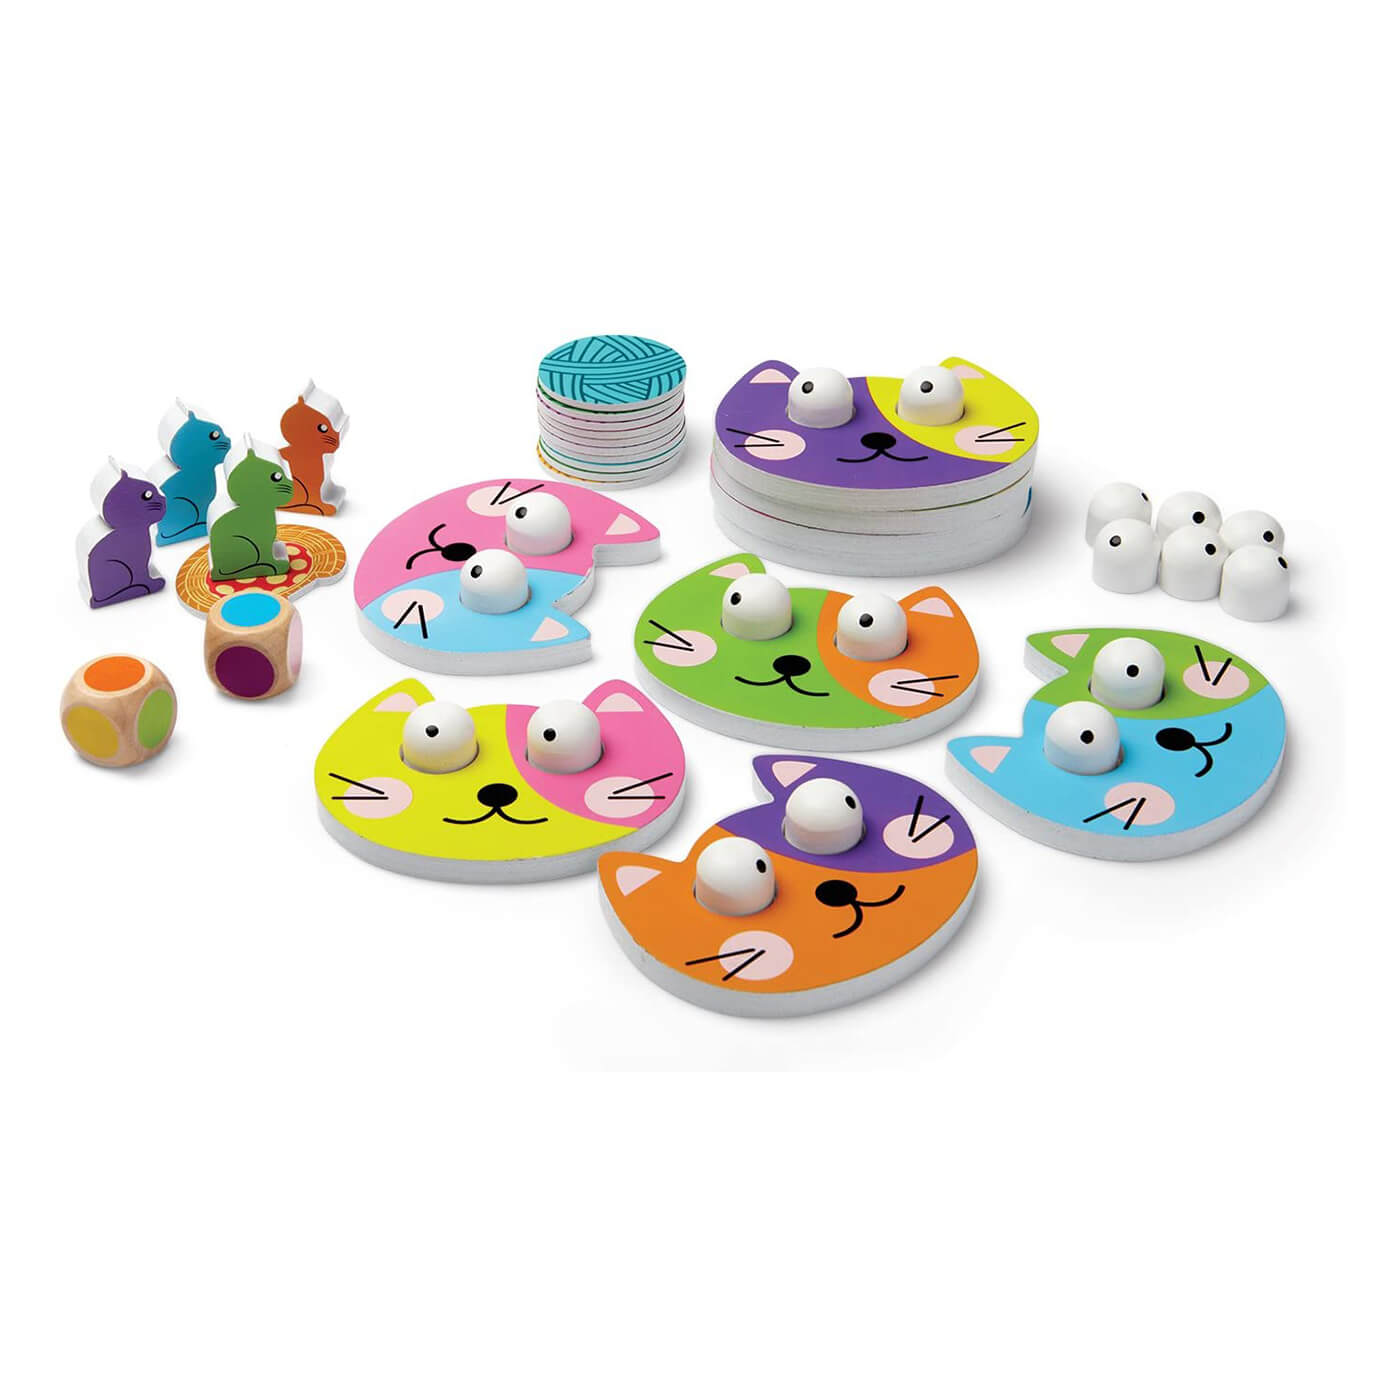 Game parts and pieces included in the Blue Orange Kitty Bitty Game.